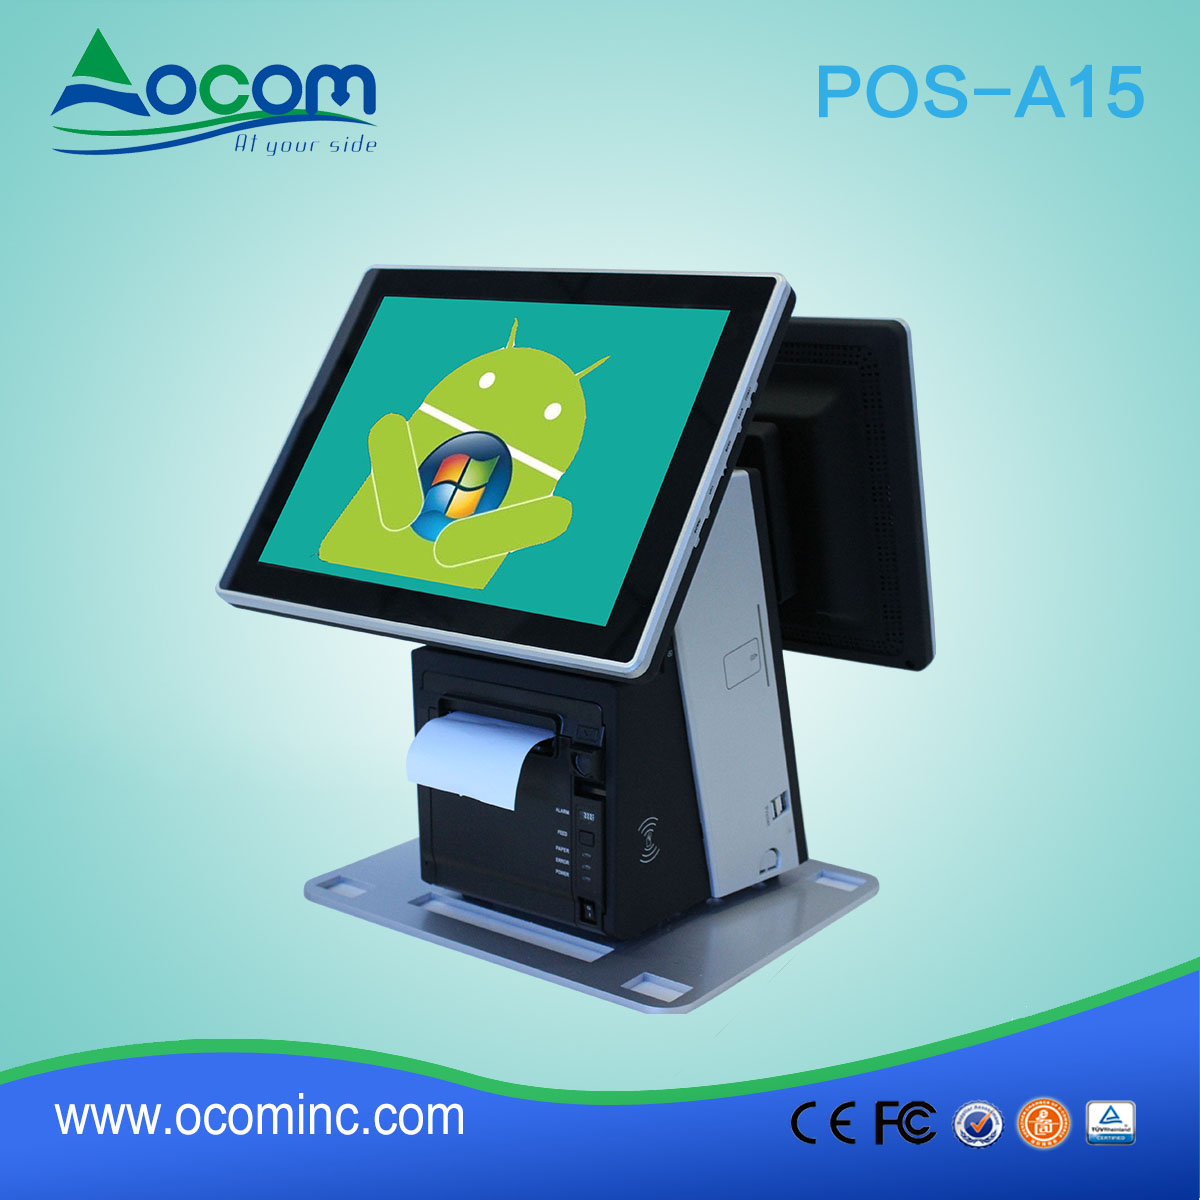 POS-A15-A 15,6-inch Android alles-in-een touchscreen pos-systeem